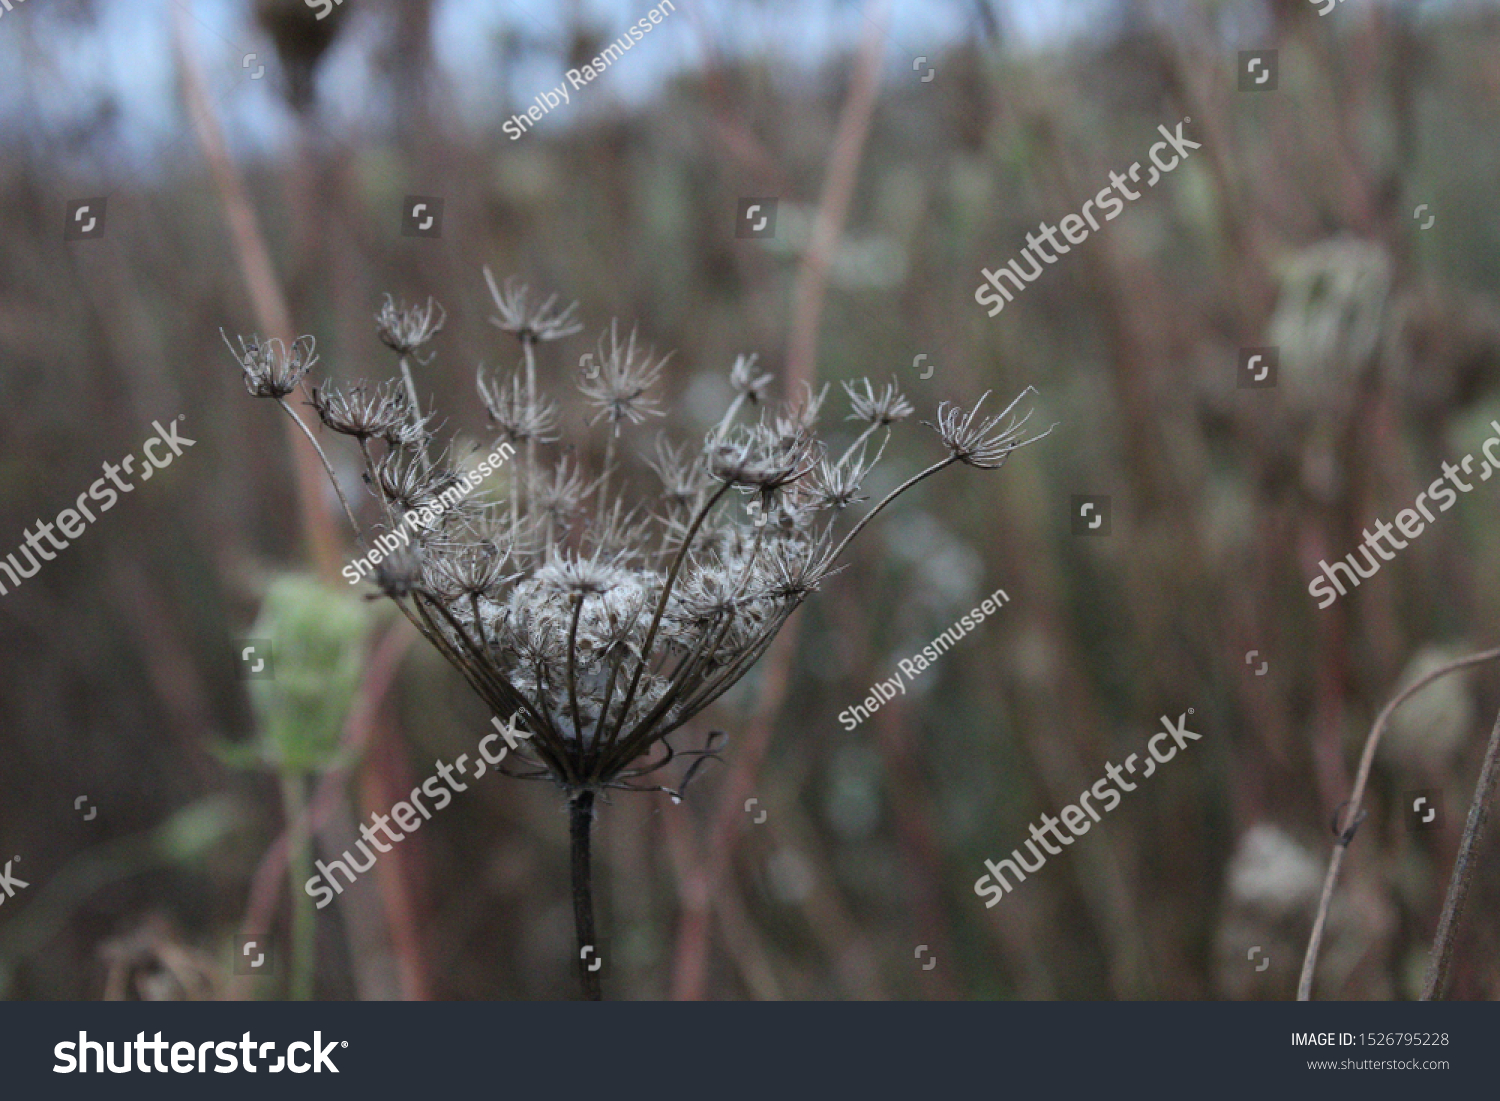 selective focus on single plant in a field #1526795228